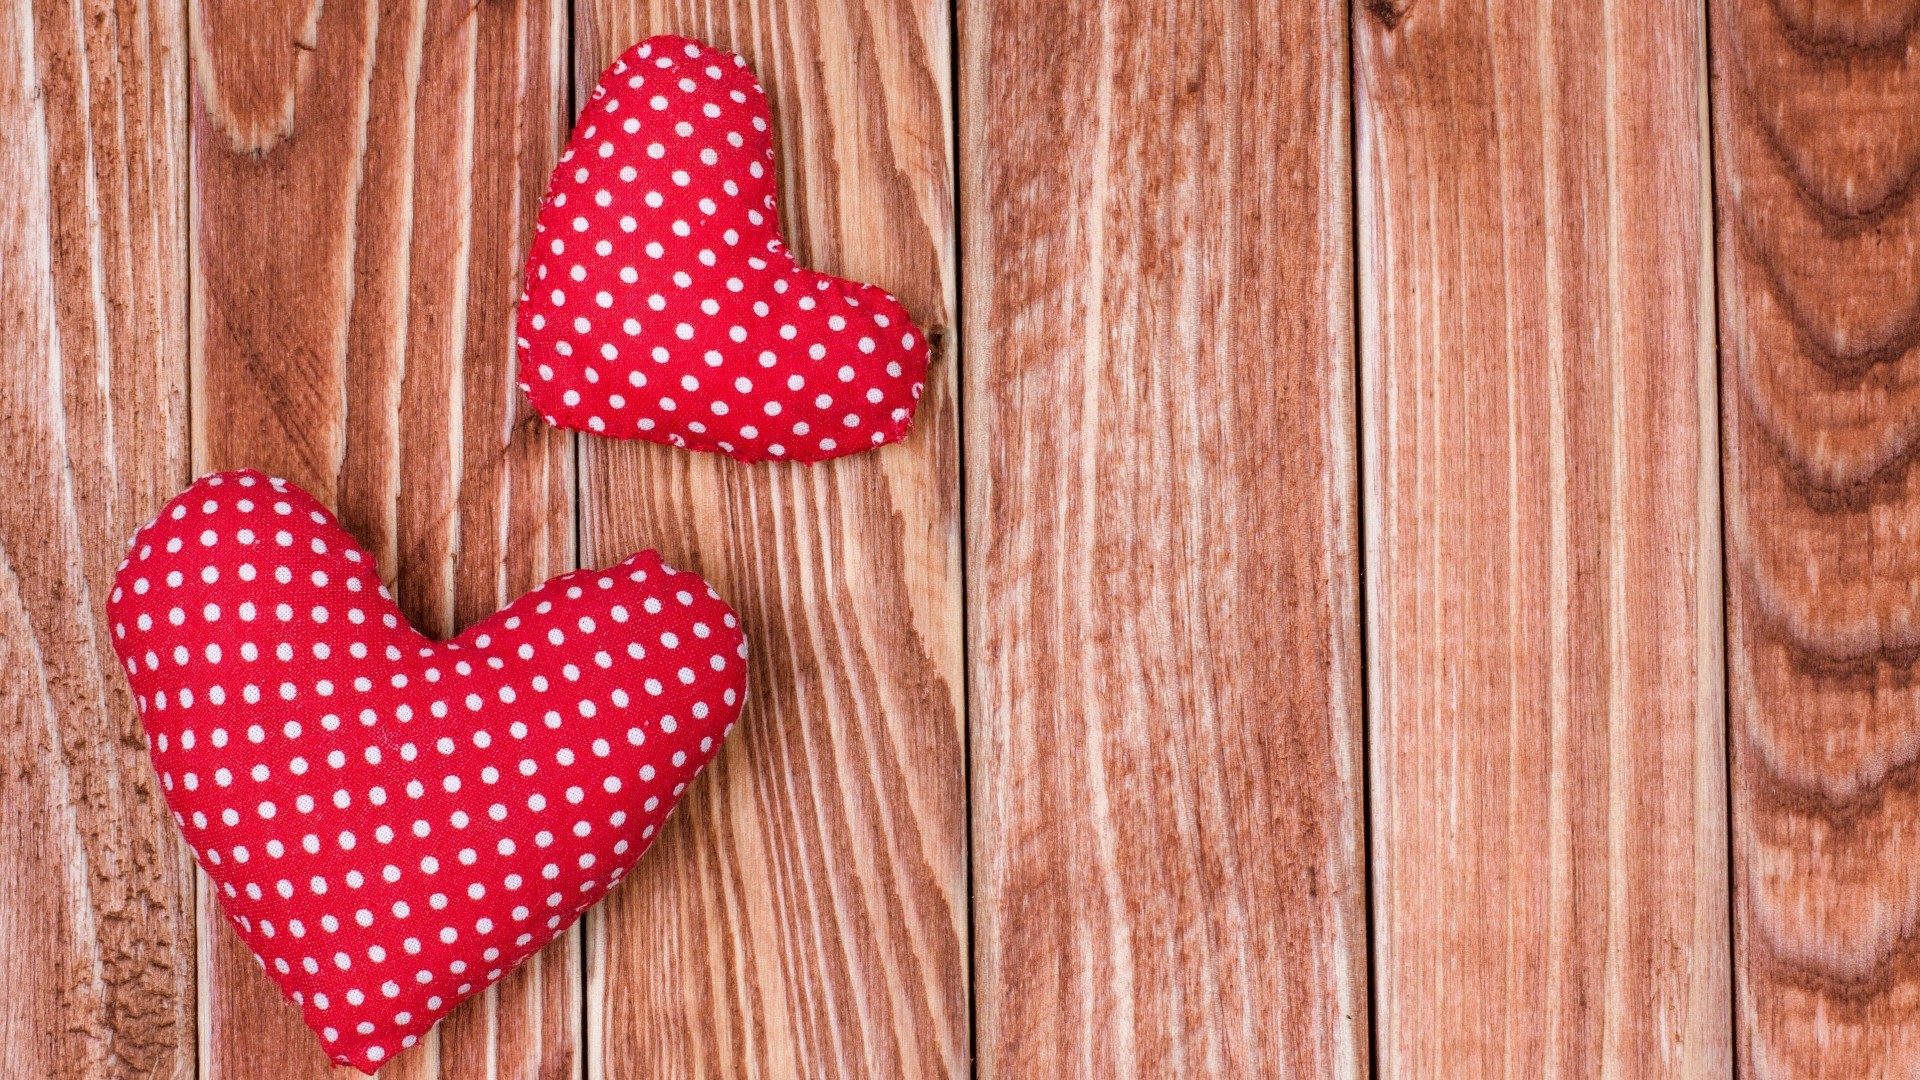 General 1920x1080 wooden surface red heart (design)